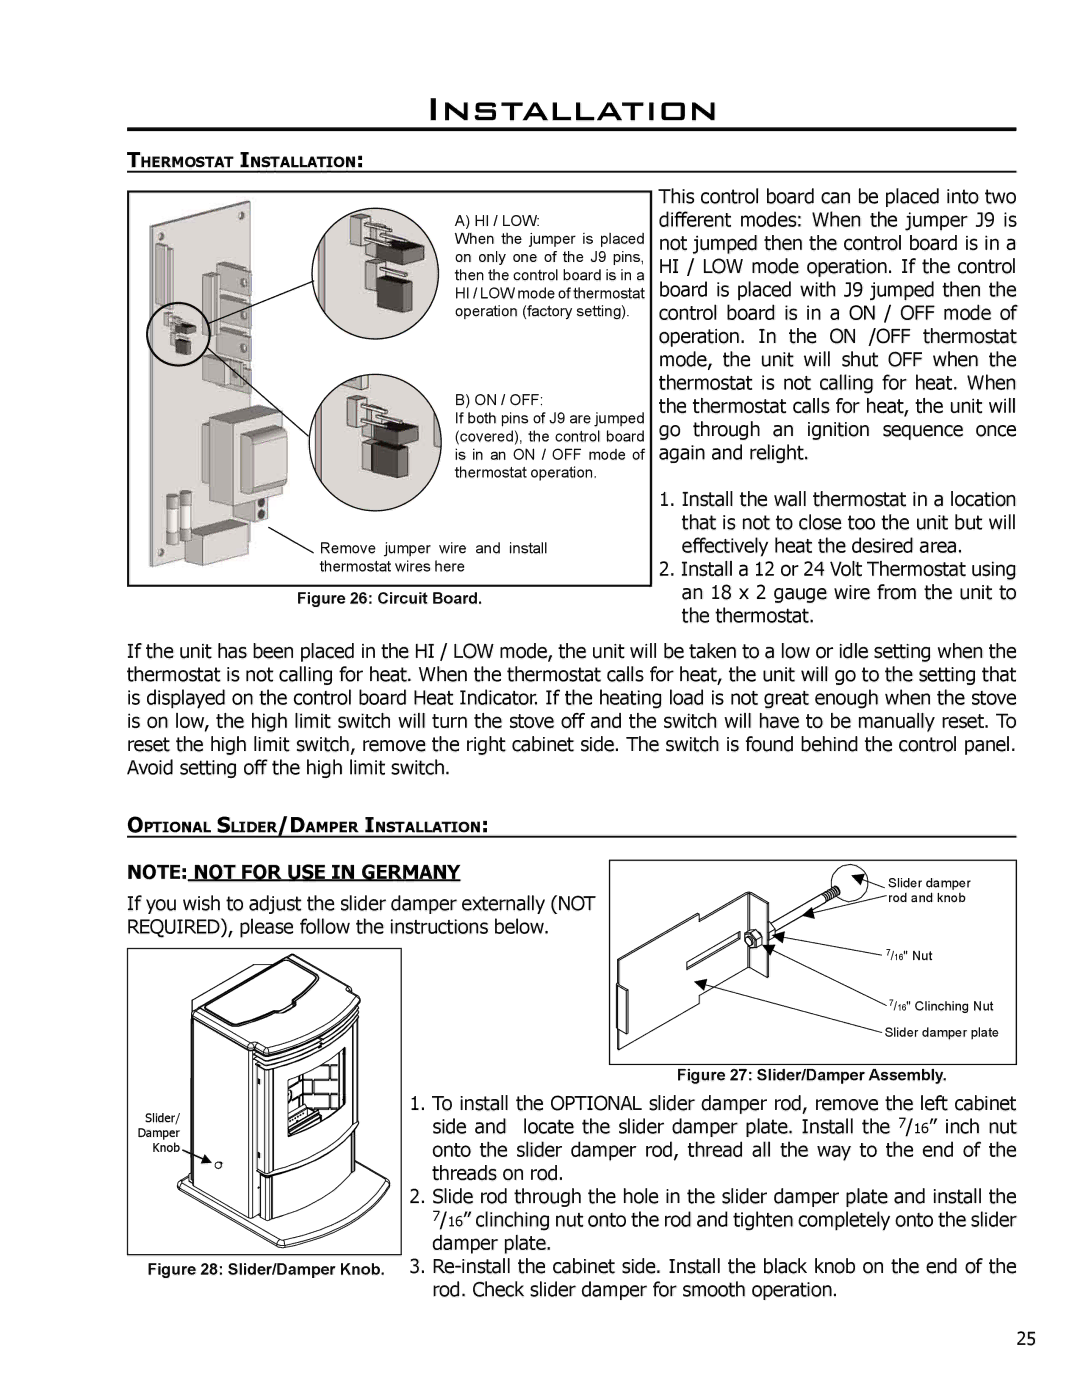 Enviro C-10608 If you wish to adjust the slider damper externally not, REQUIRED, please follow the instructions below 